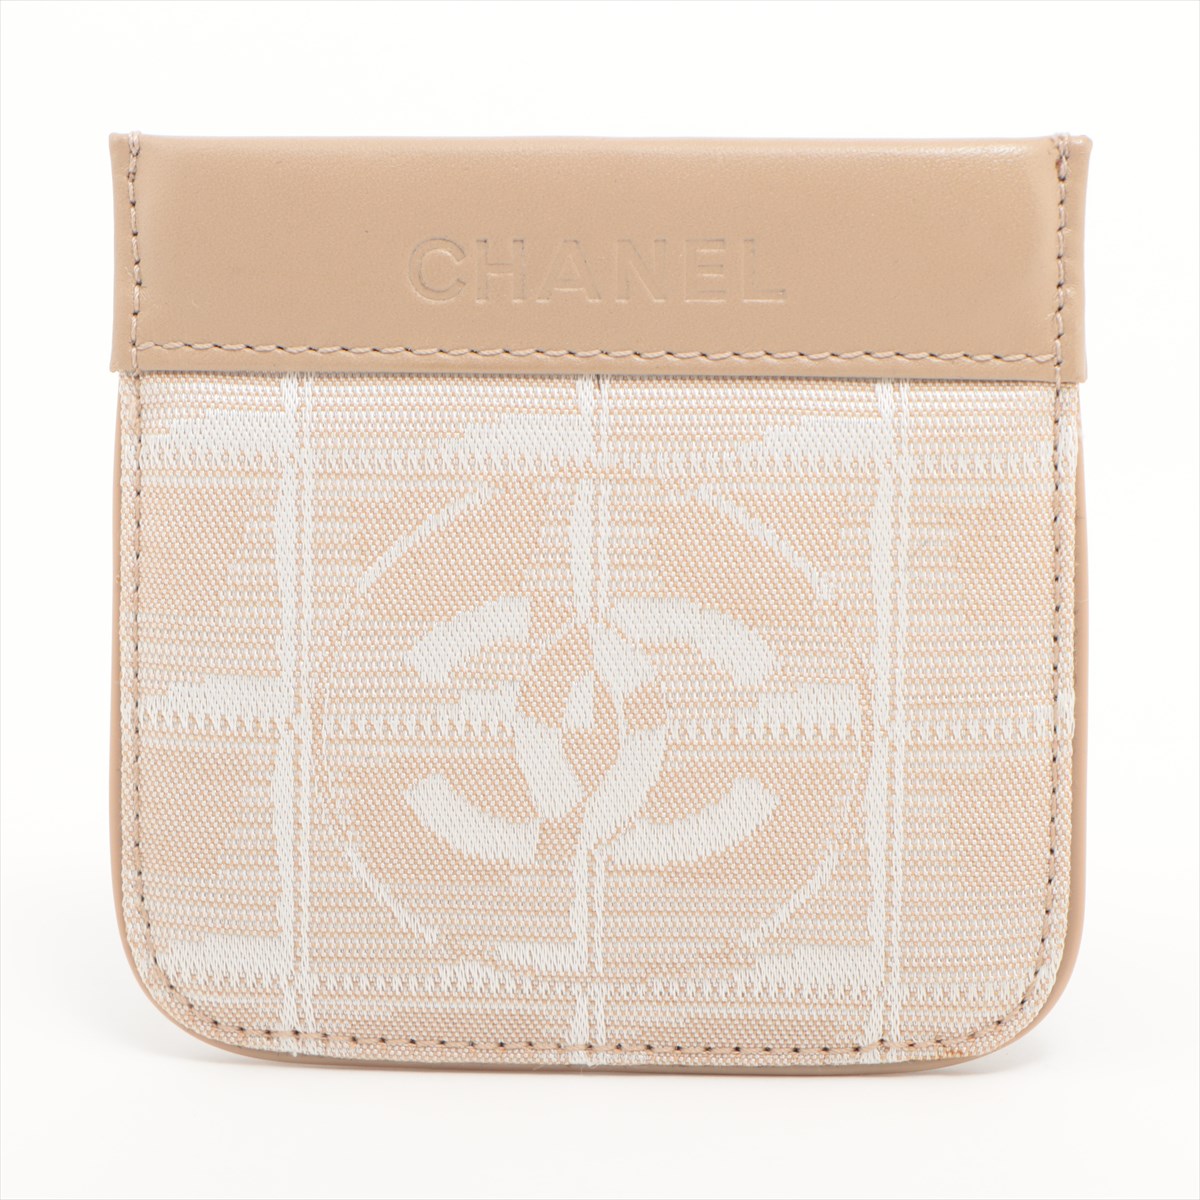 Chanel New Travel Line Canvas & leather Key case Beige Silver Metal fittings 7XXXXXX